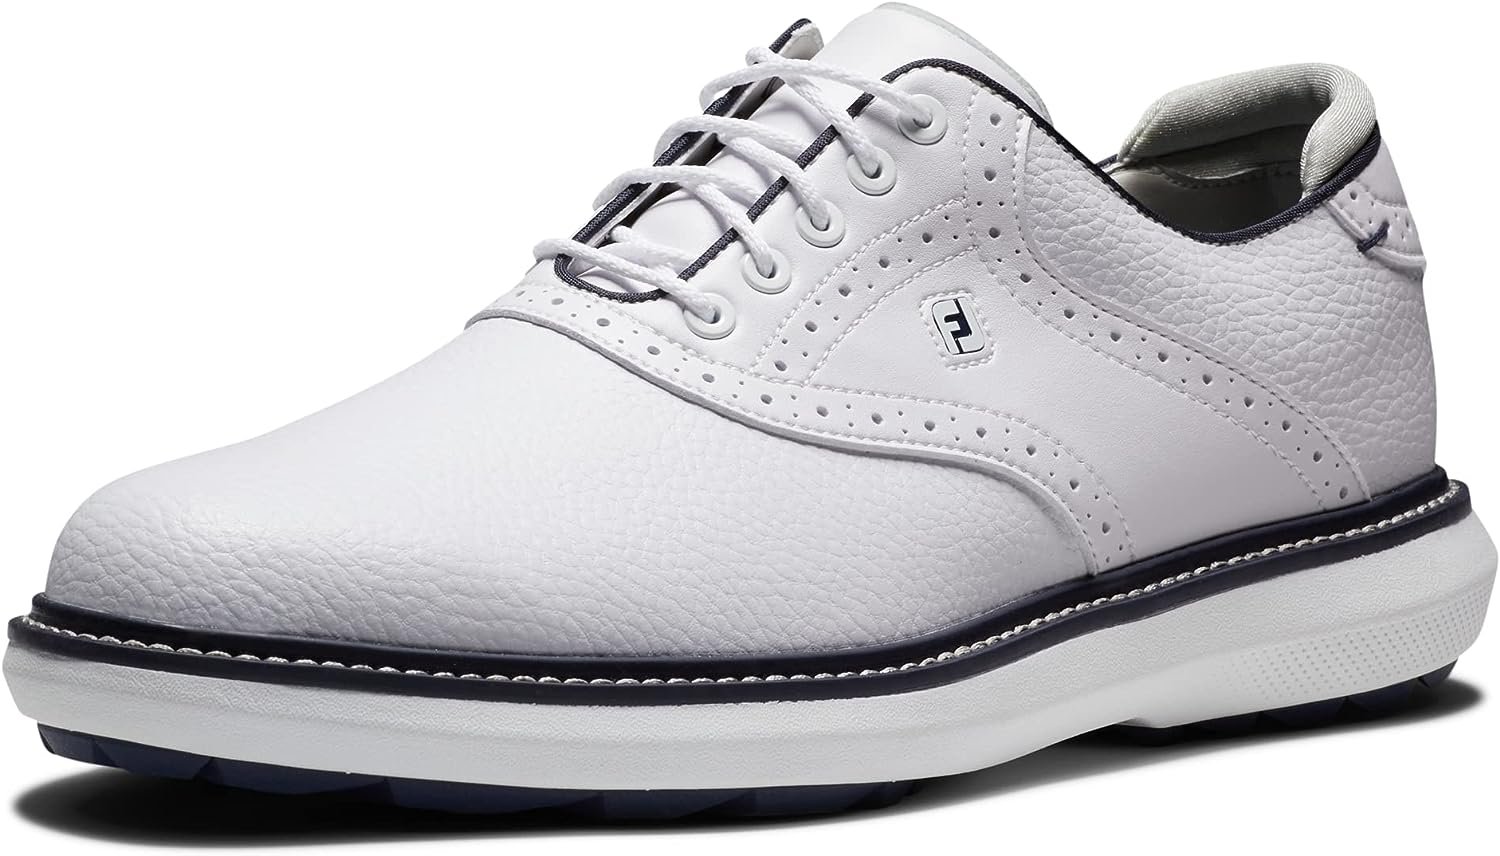 FootJoy Mens Traditions Spikeless Golf Shoe